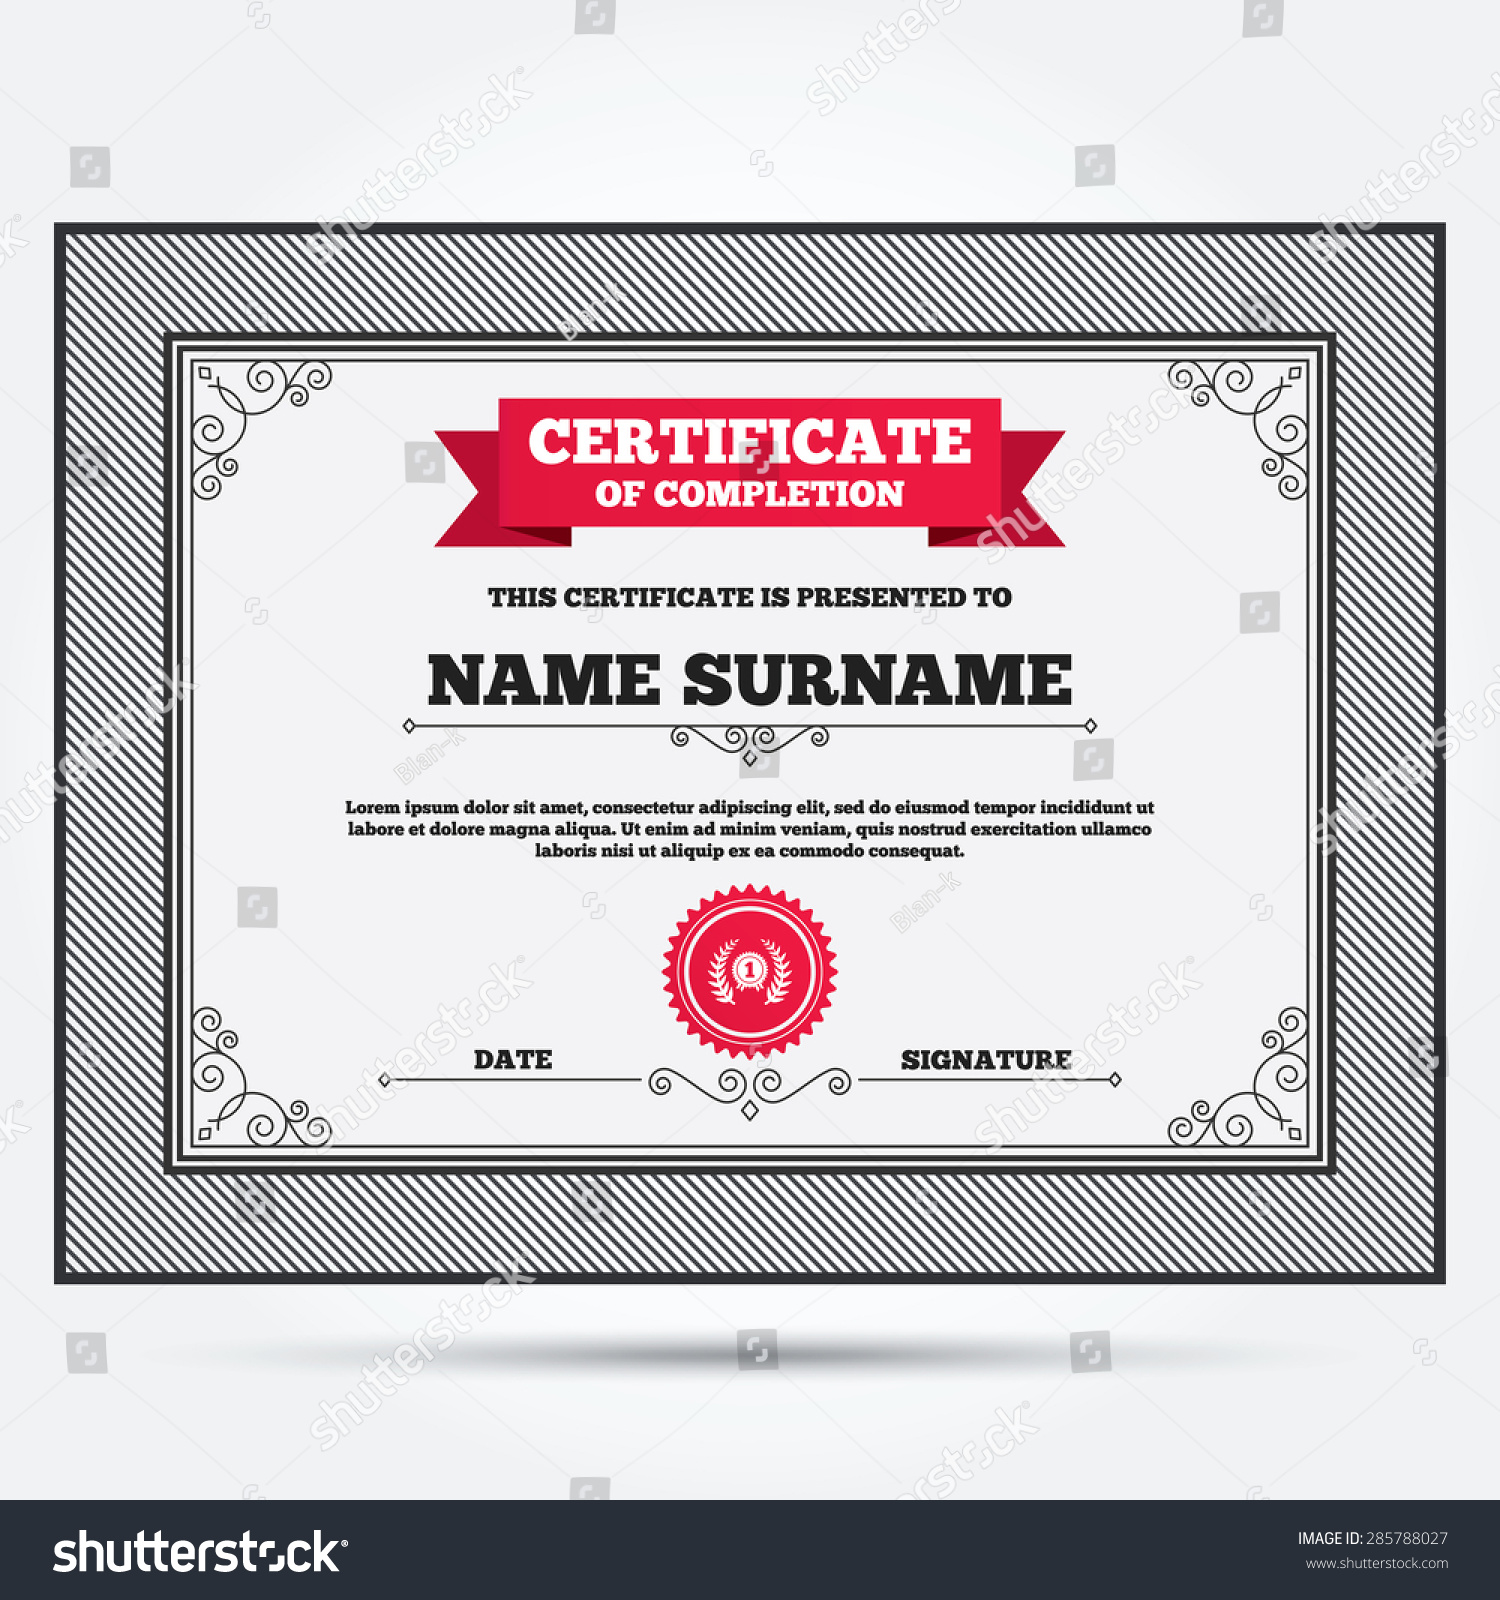 Certificate Completion First Place Award Sign Stock Vector Inside First Place Award Certificate Template